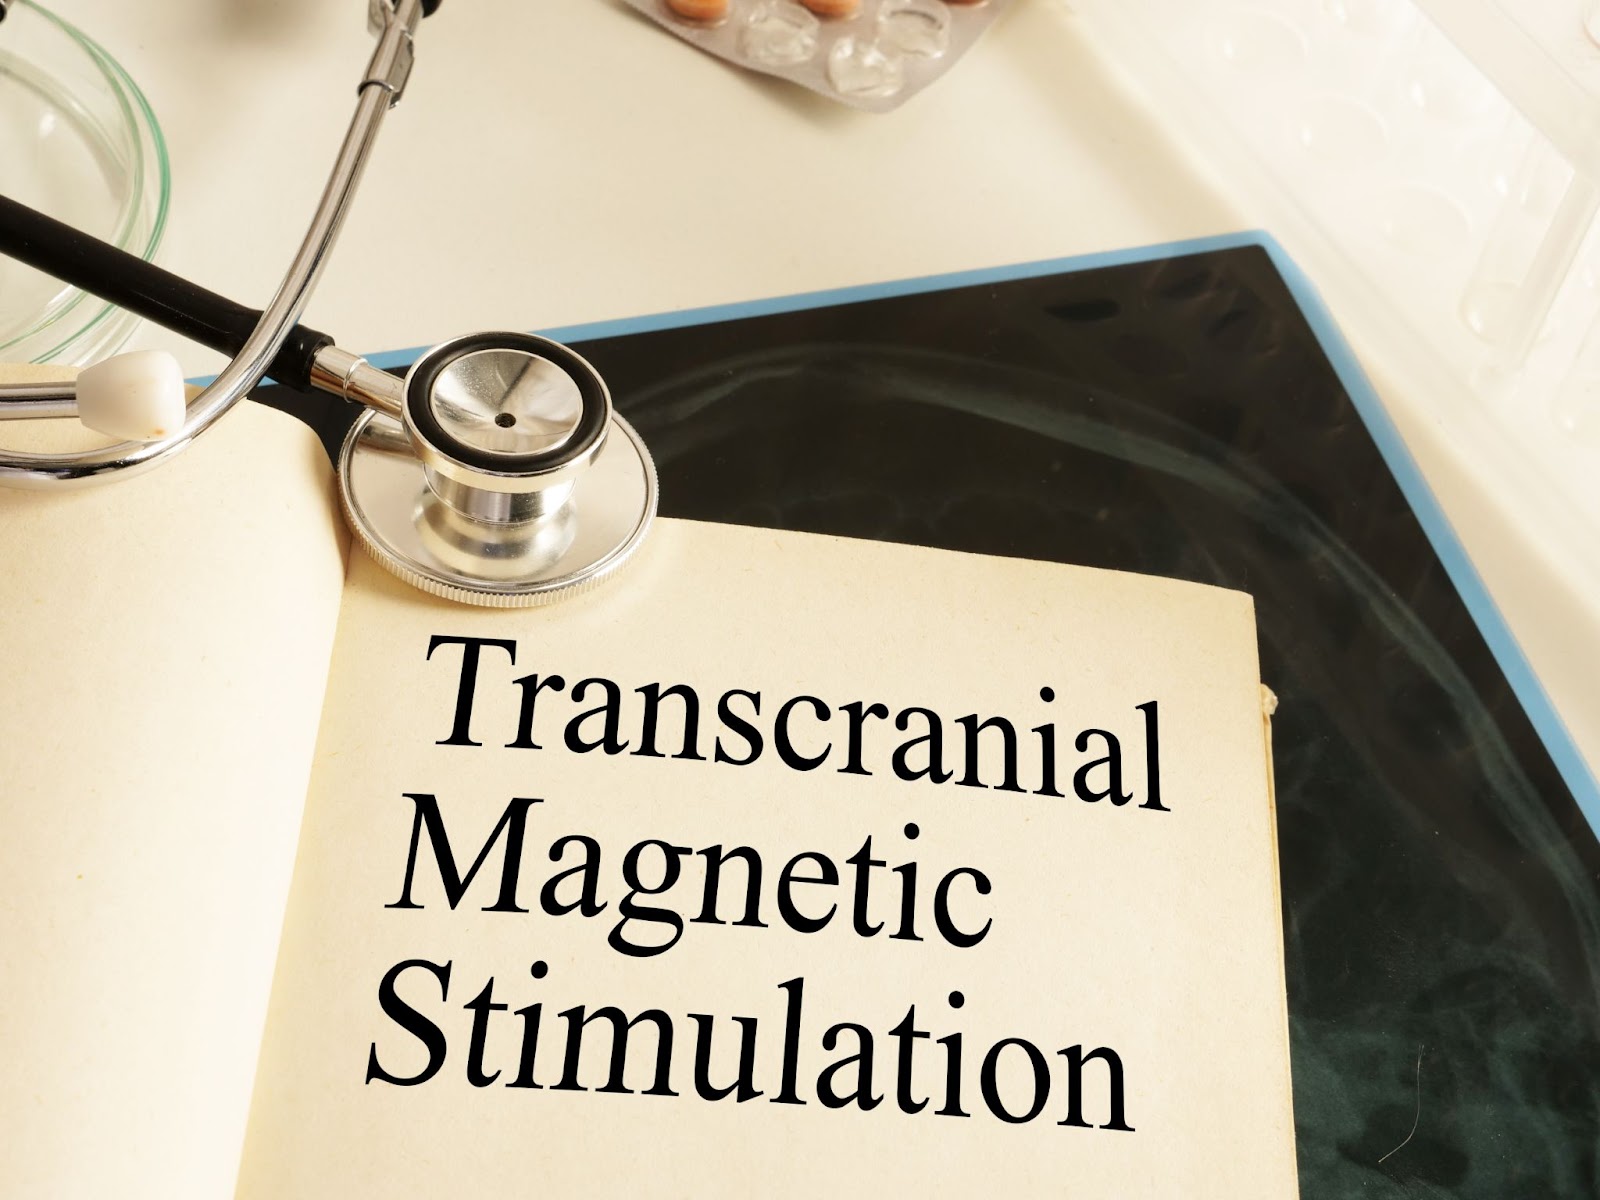 Image of transcranial magnetic stimulation (TMS) therapy for depression, also used for insomnia and ADHD treatment